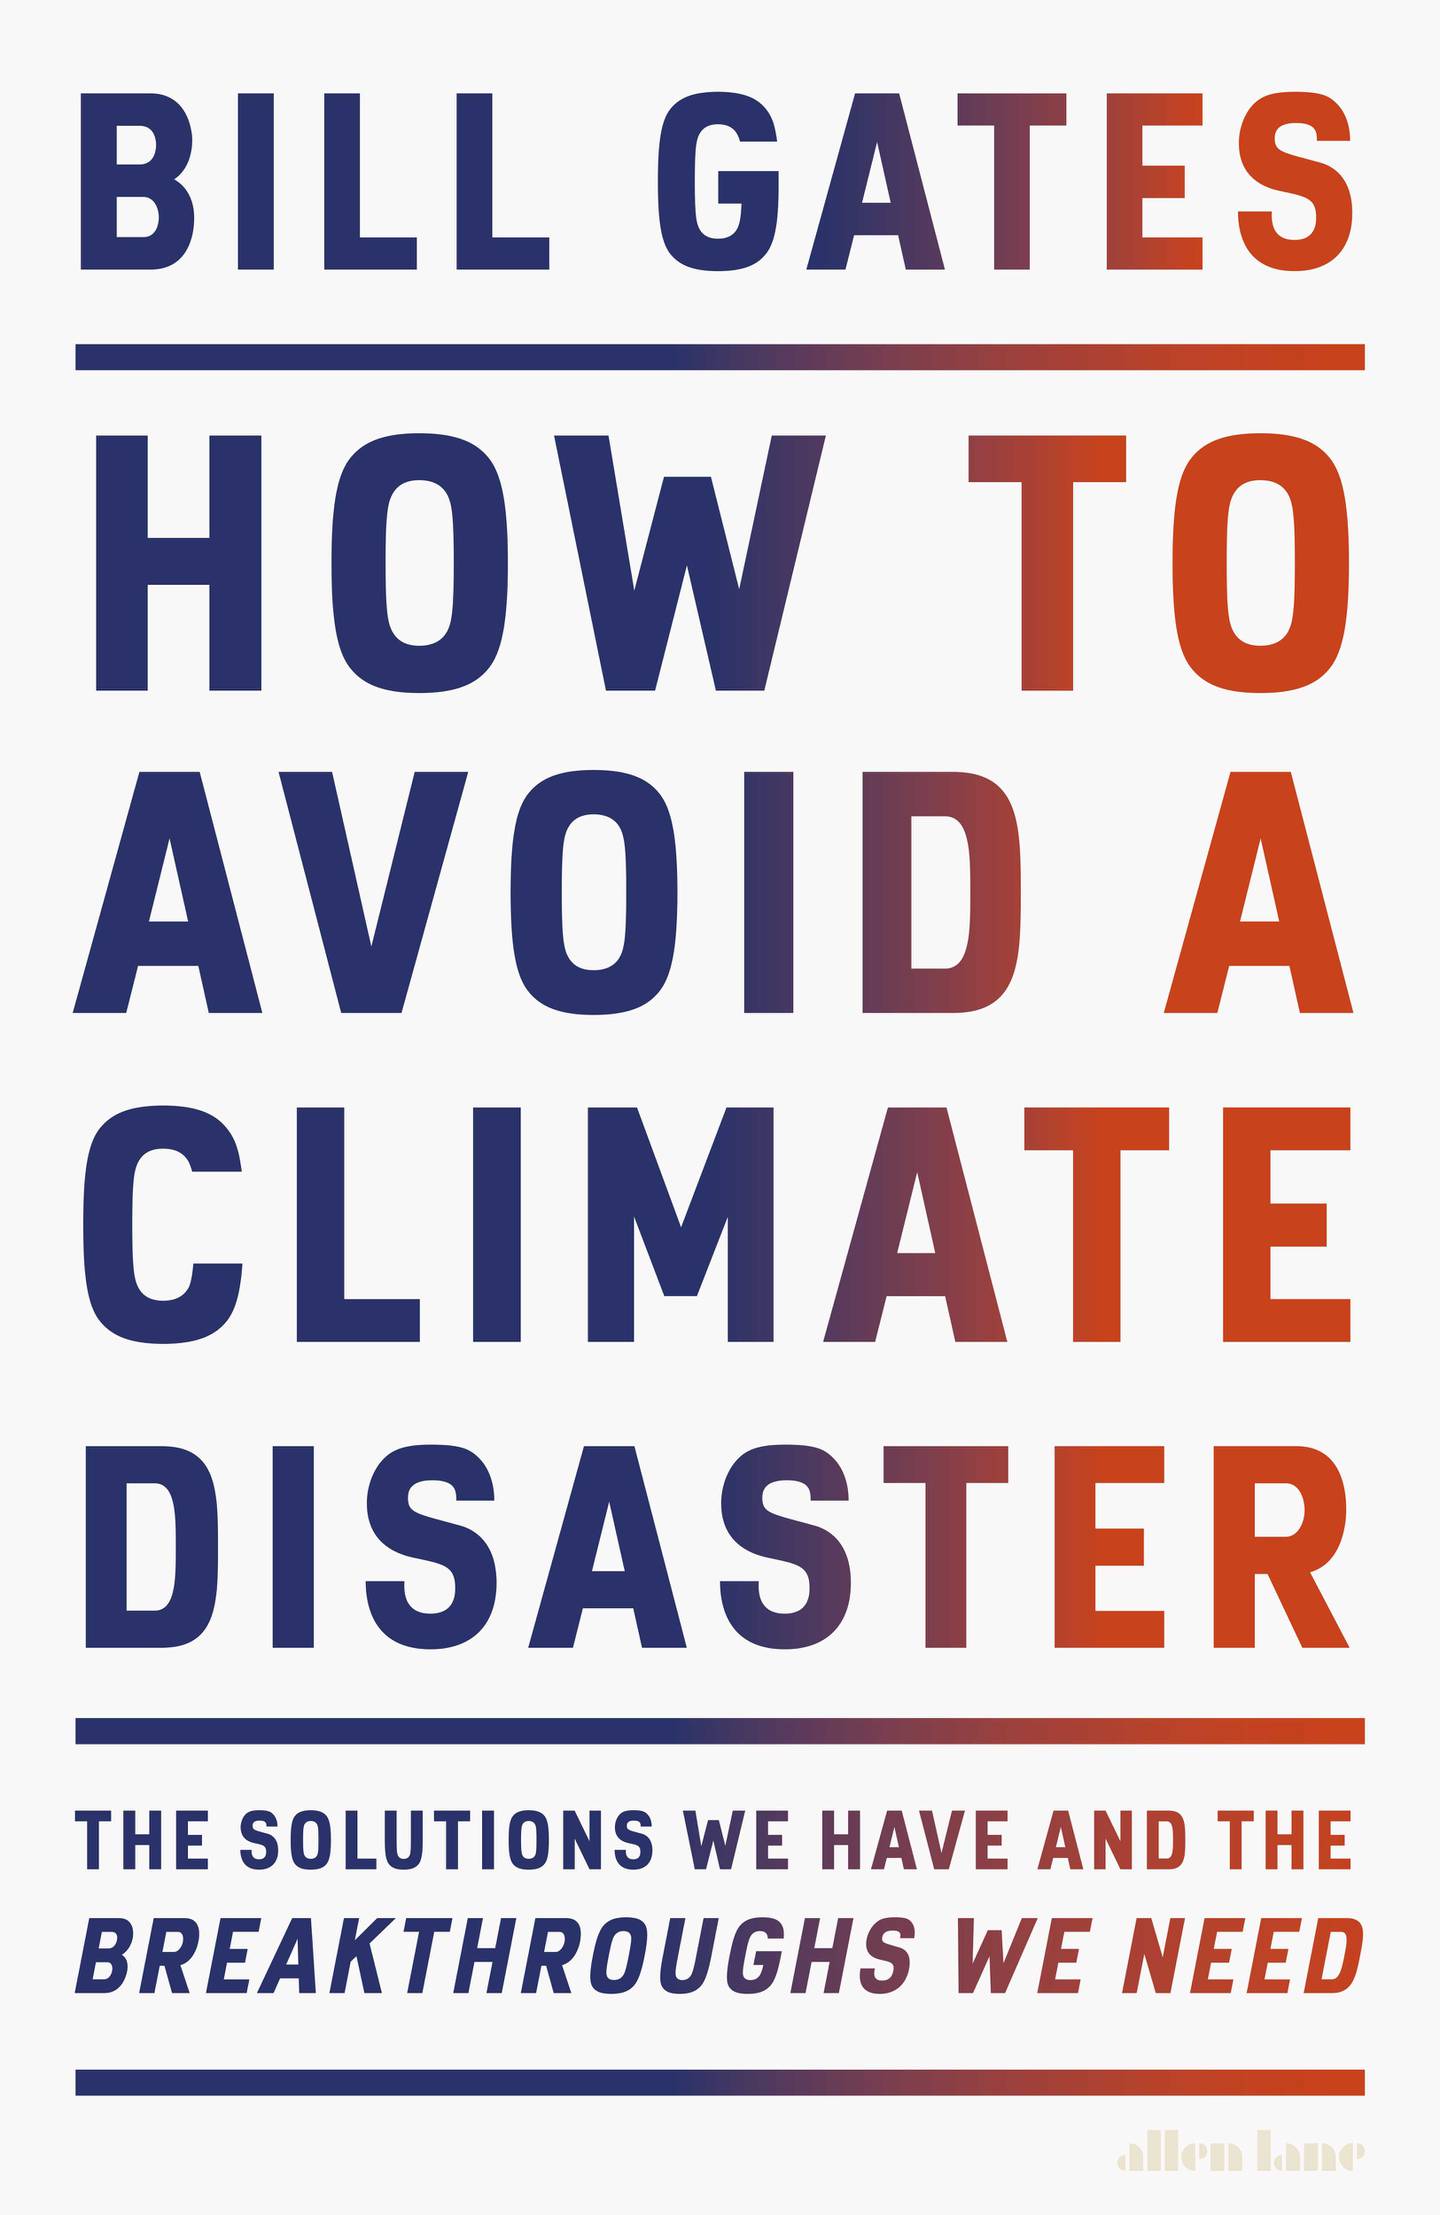 How to Avoid a Climate Disaster: The Solutions We Have and the Breakthroughs We Need by Bill Gates published by Allen Lane. Photo: Penguin UK